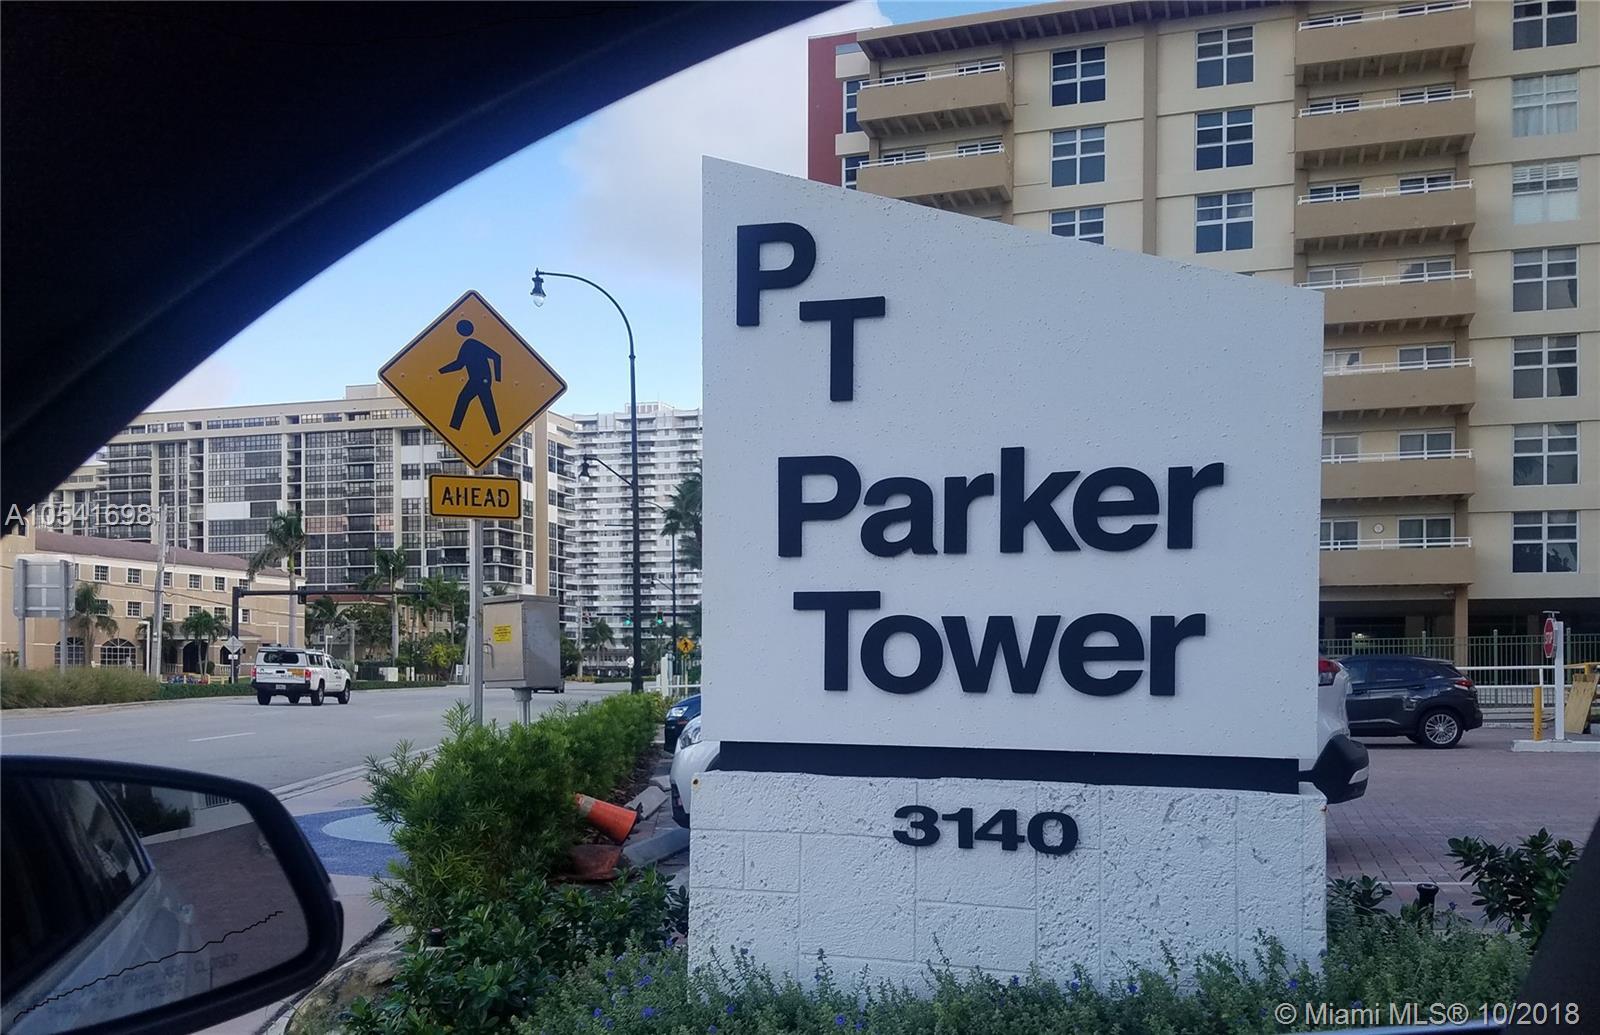 Parker Tower - Condos for sale